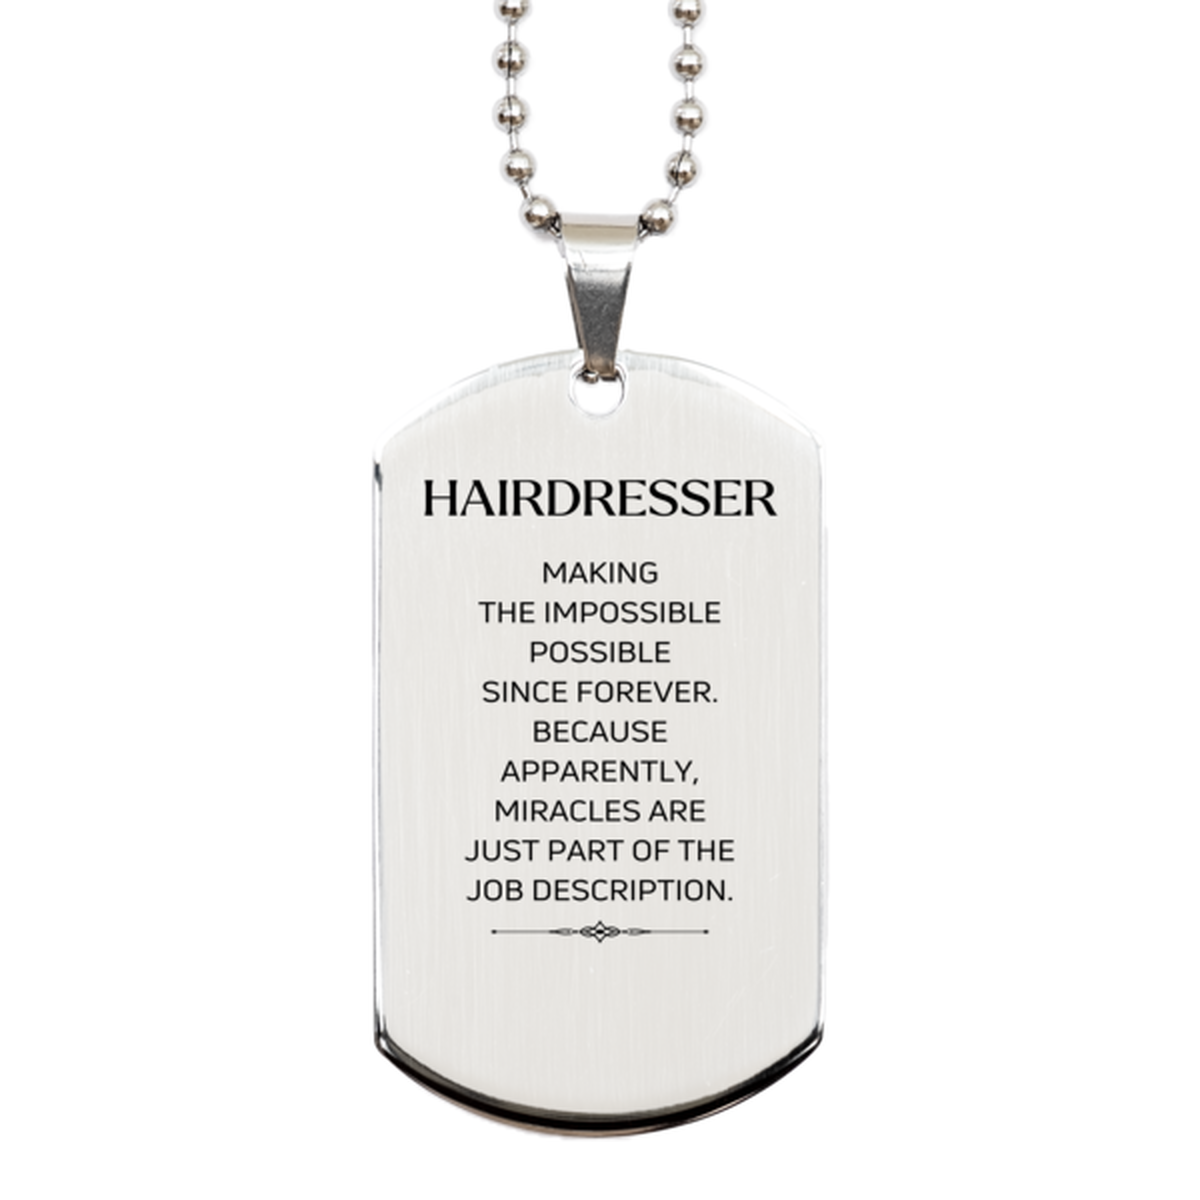 Funny Hairdresser Gifts, Miracles are just part of the job description, Inspirational Birthday Silver Dog Tag For Hairdresser, Men, Women, Coworkers, Friends, Boss